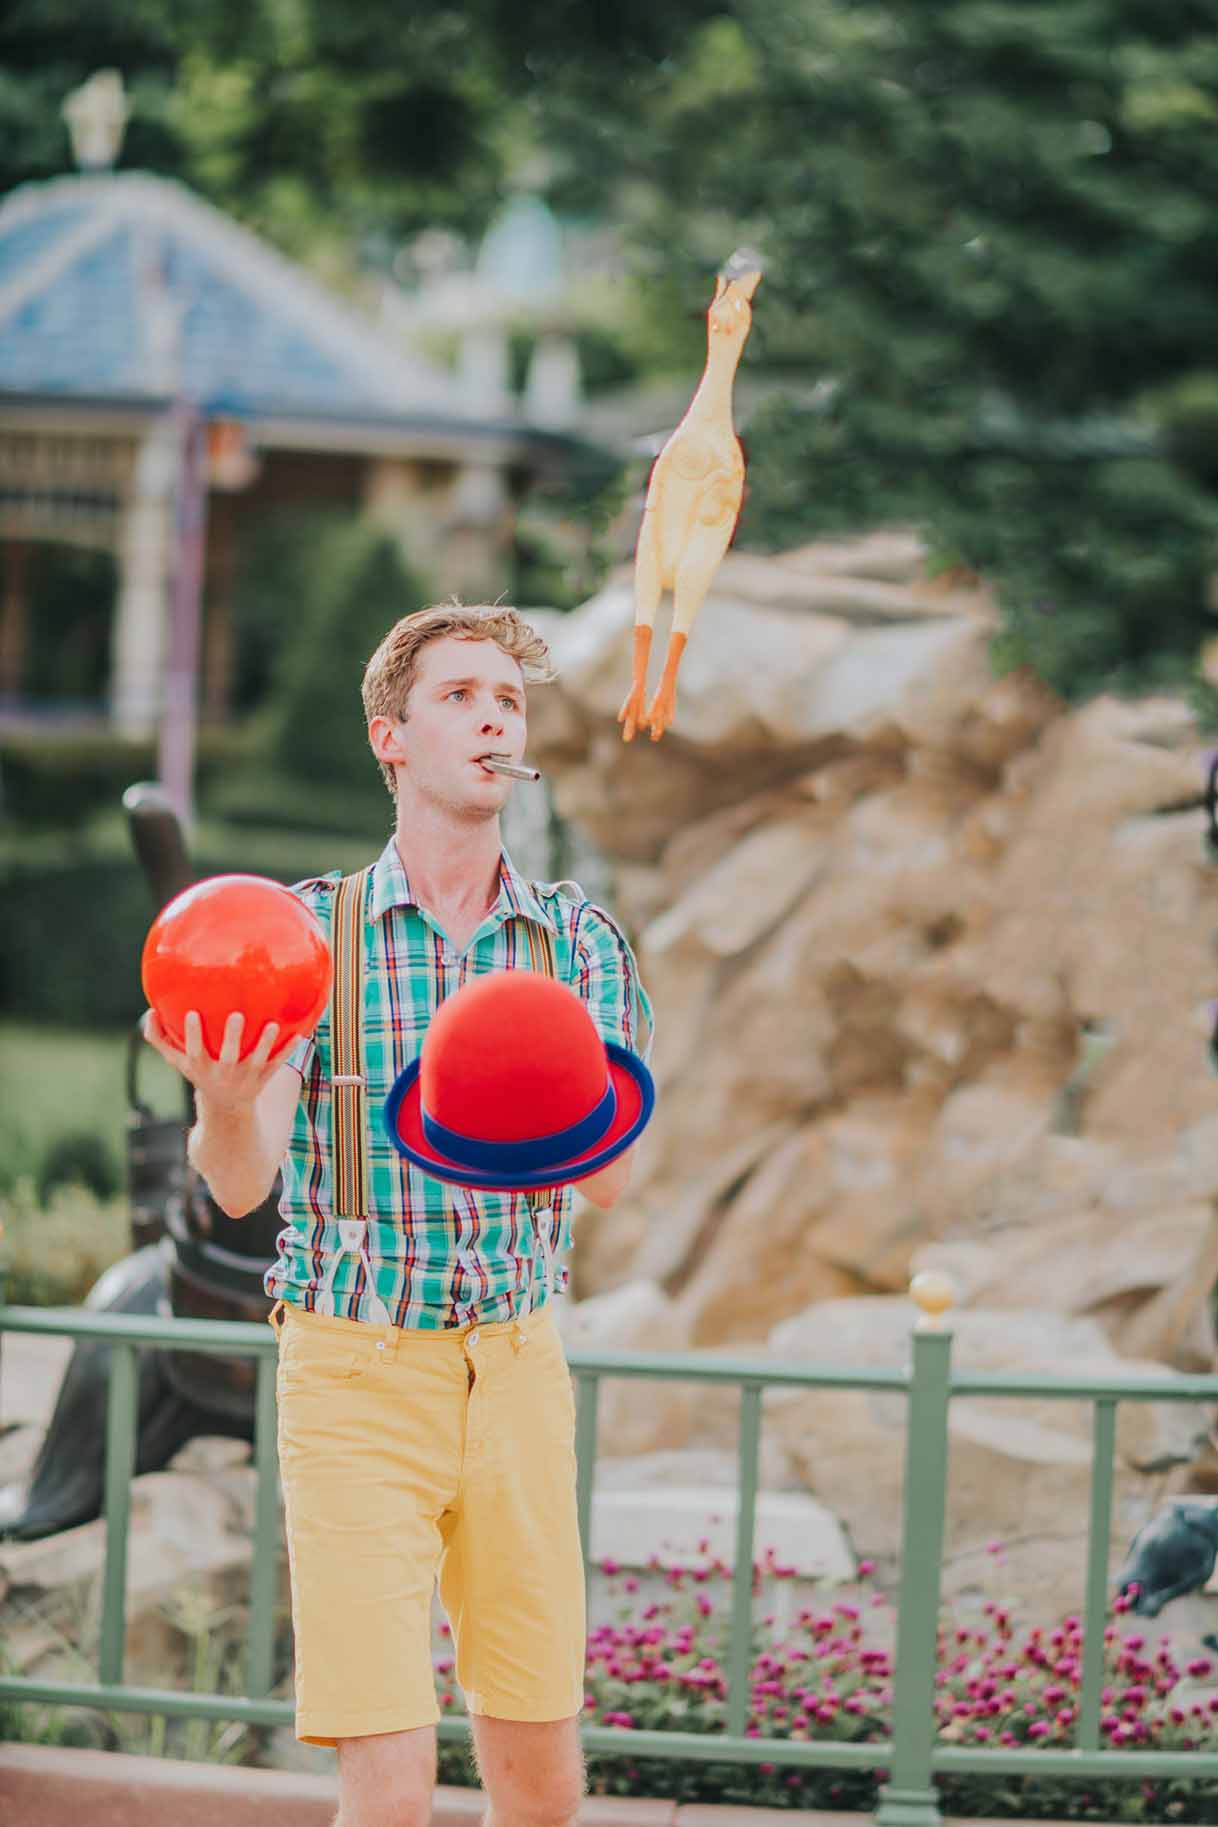 childrens entertainer juggling hat and ball in a magic show